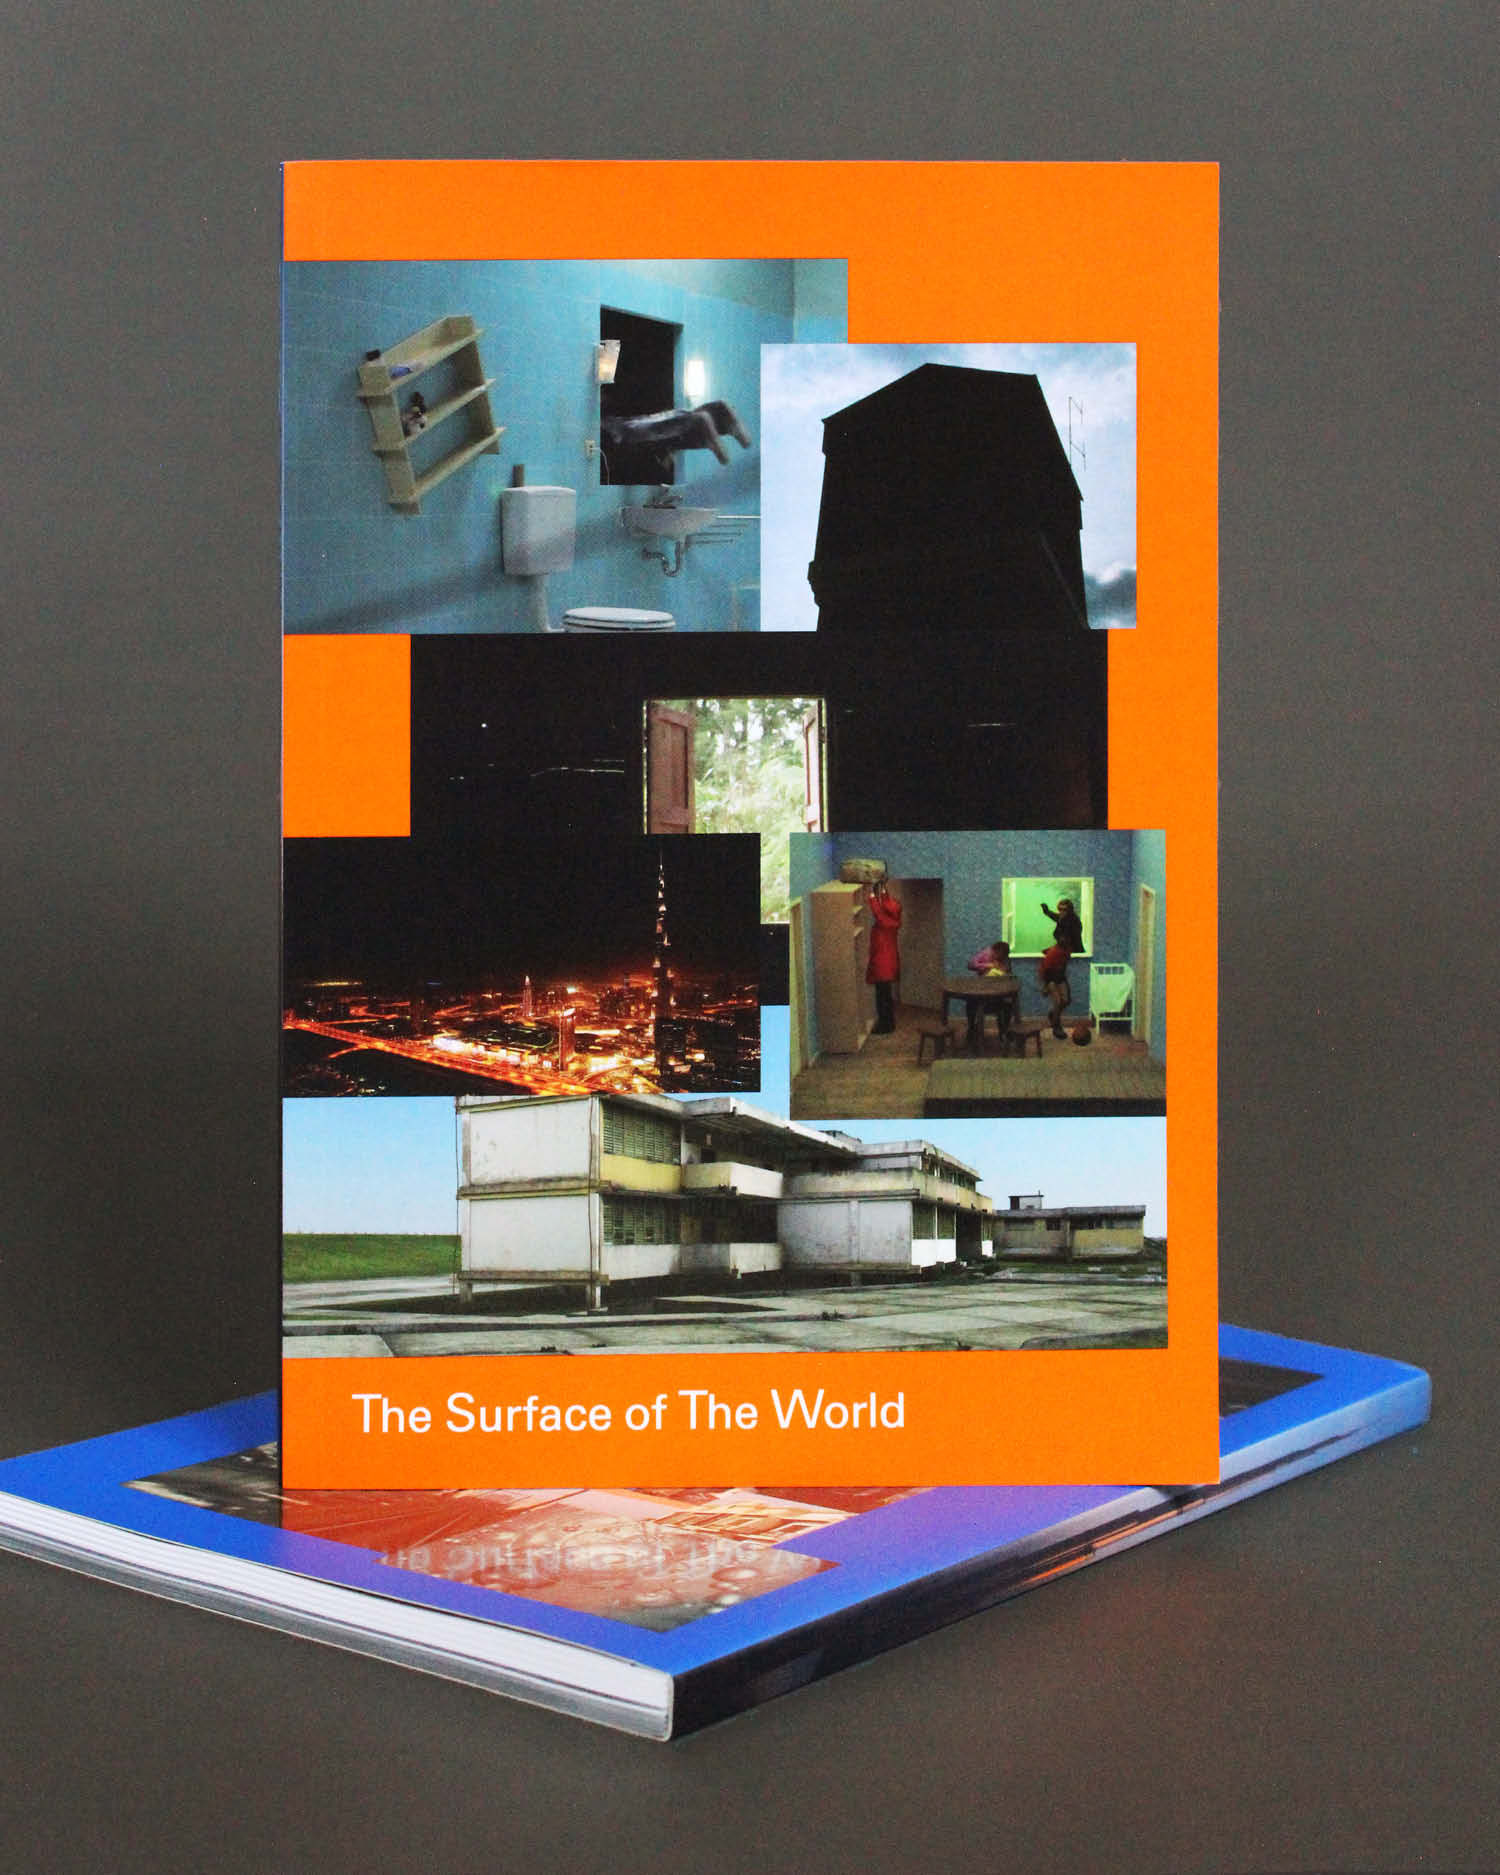 Clare Carolin, The Surface of the World exhibition catalogue for MCAD Manila